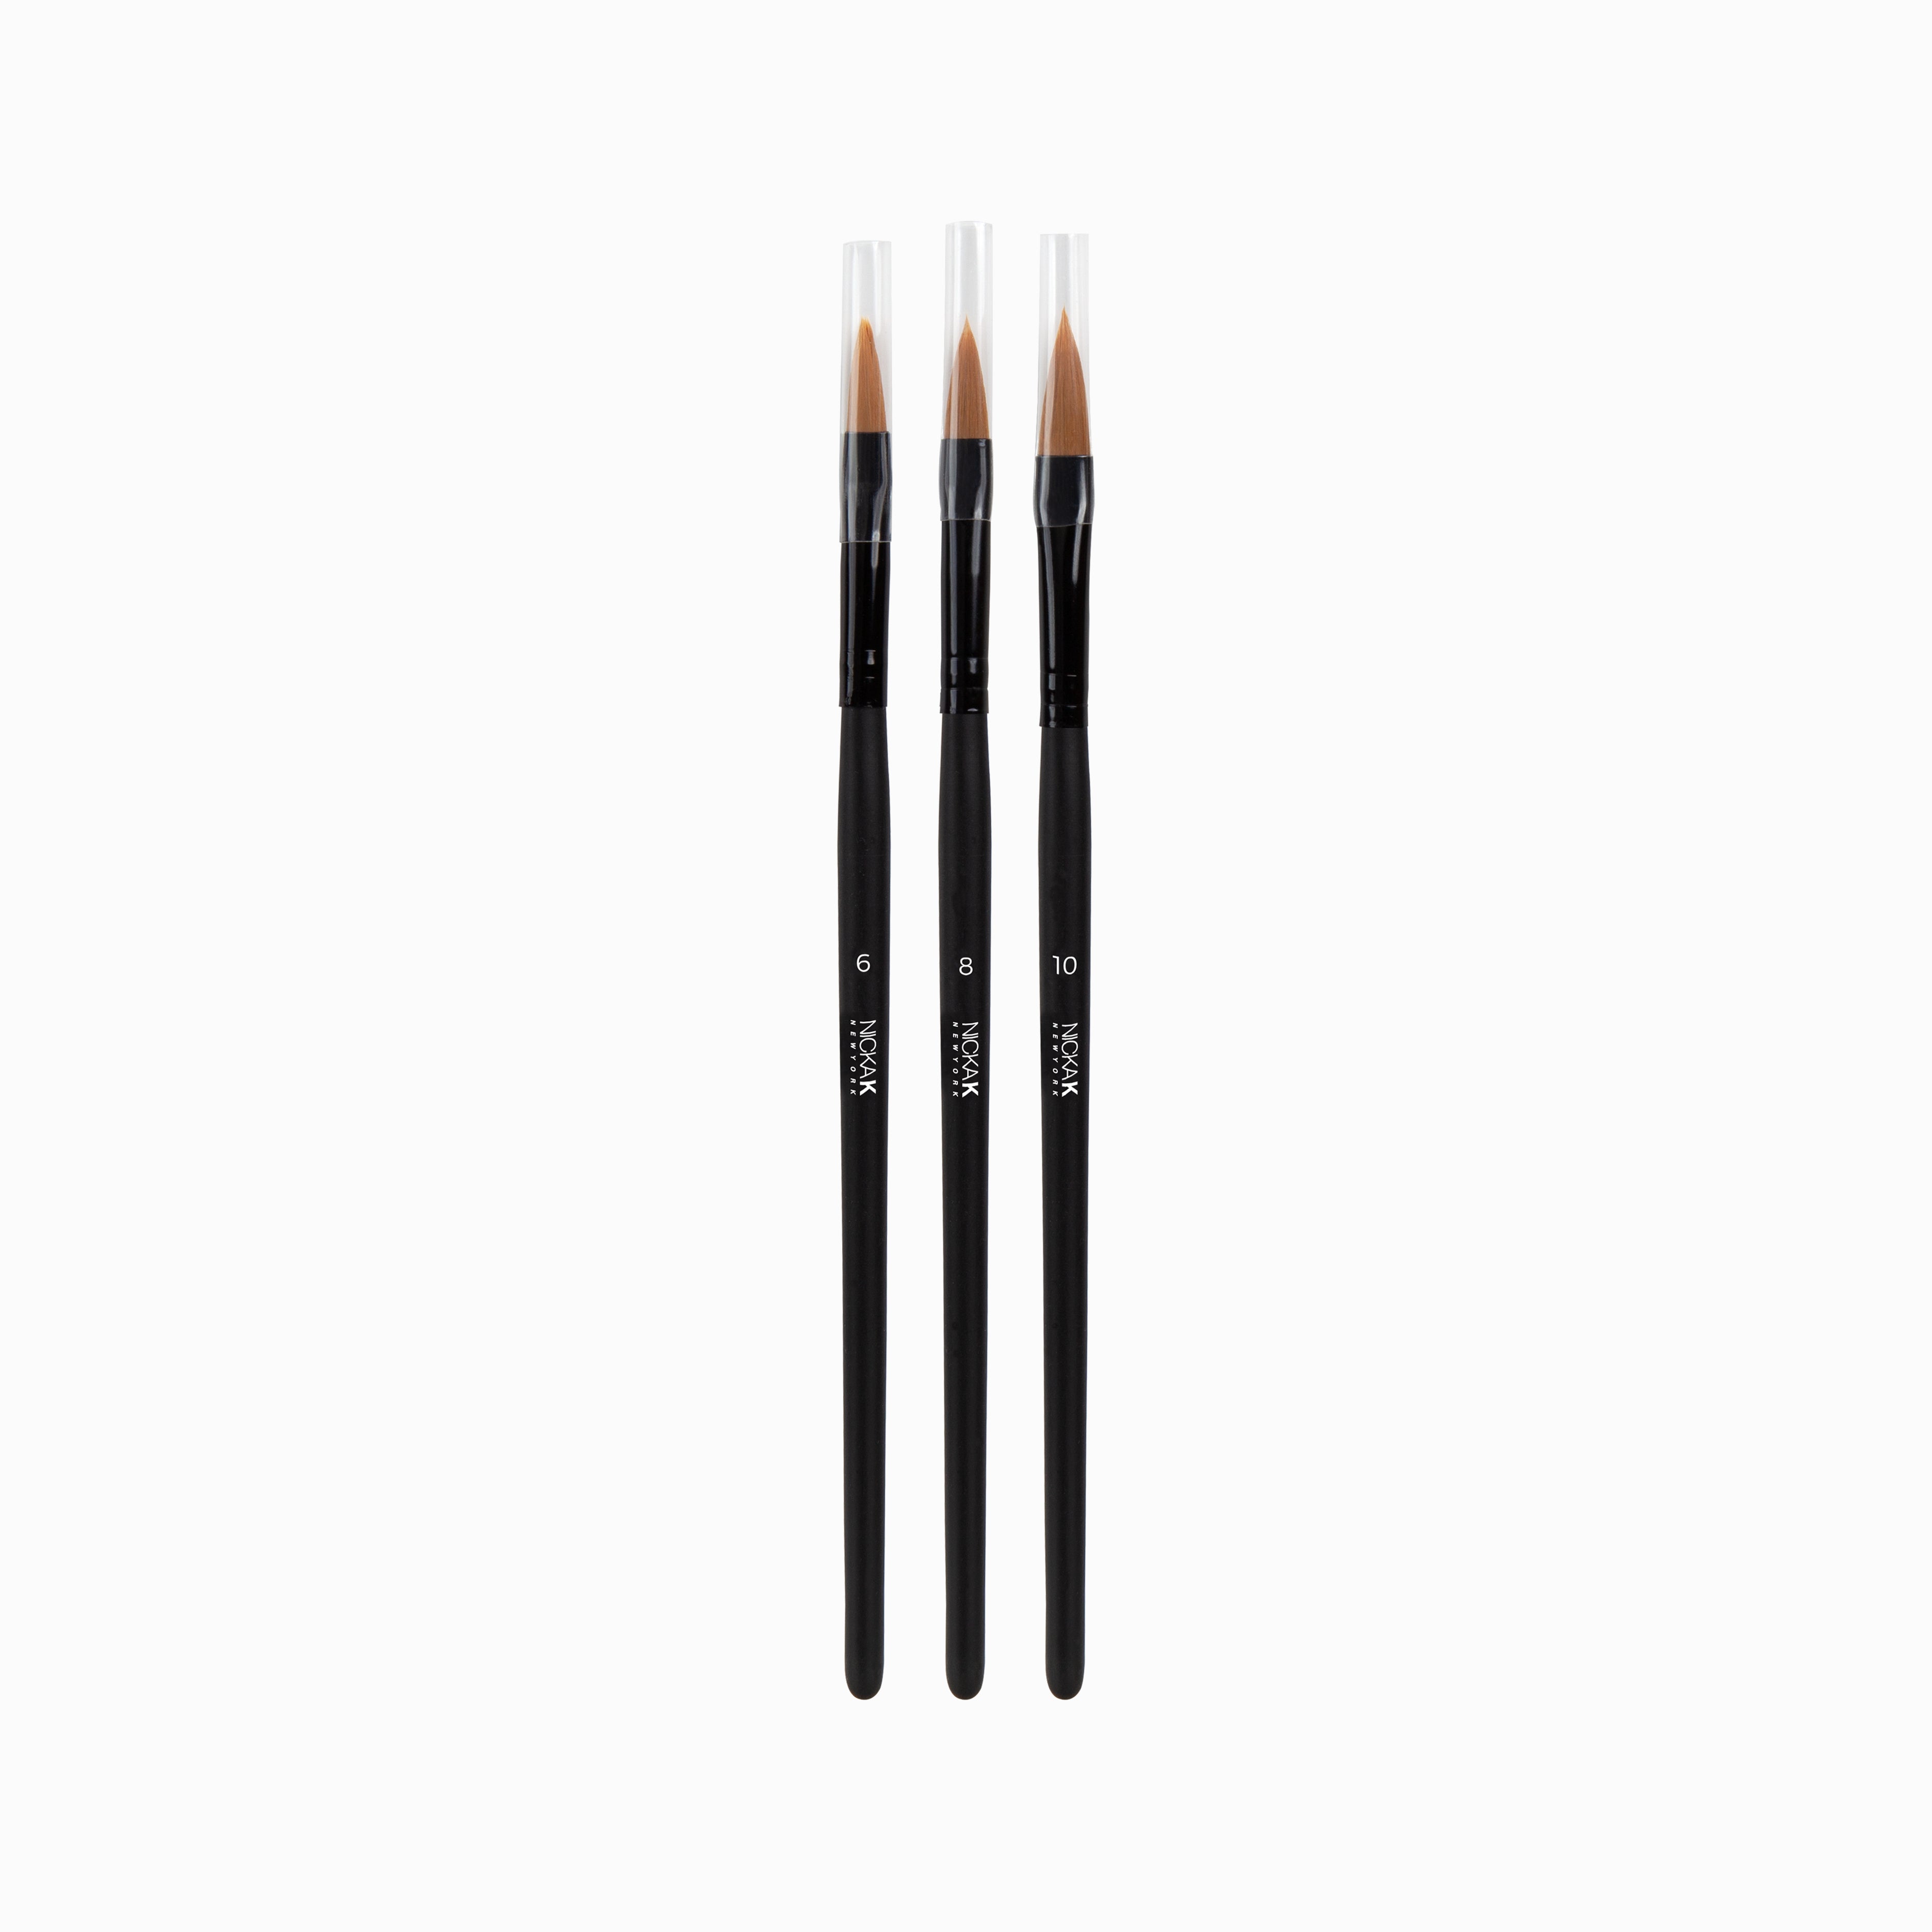 Shop Clear Acrylic Brush Online Now – Nail Company Wholesale Supply, Inc